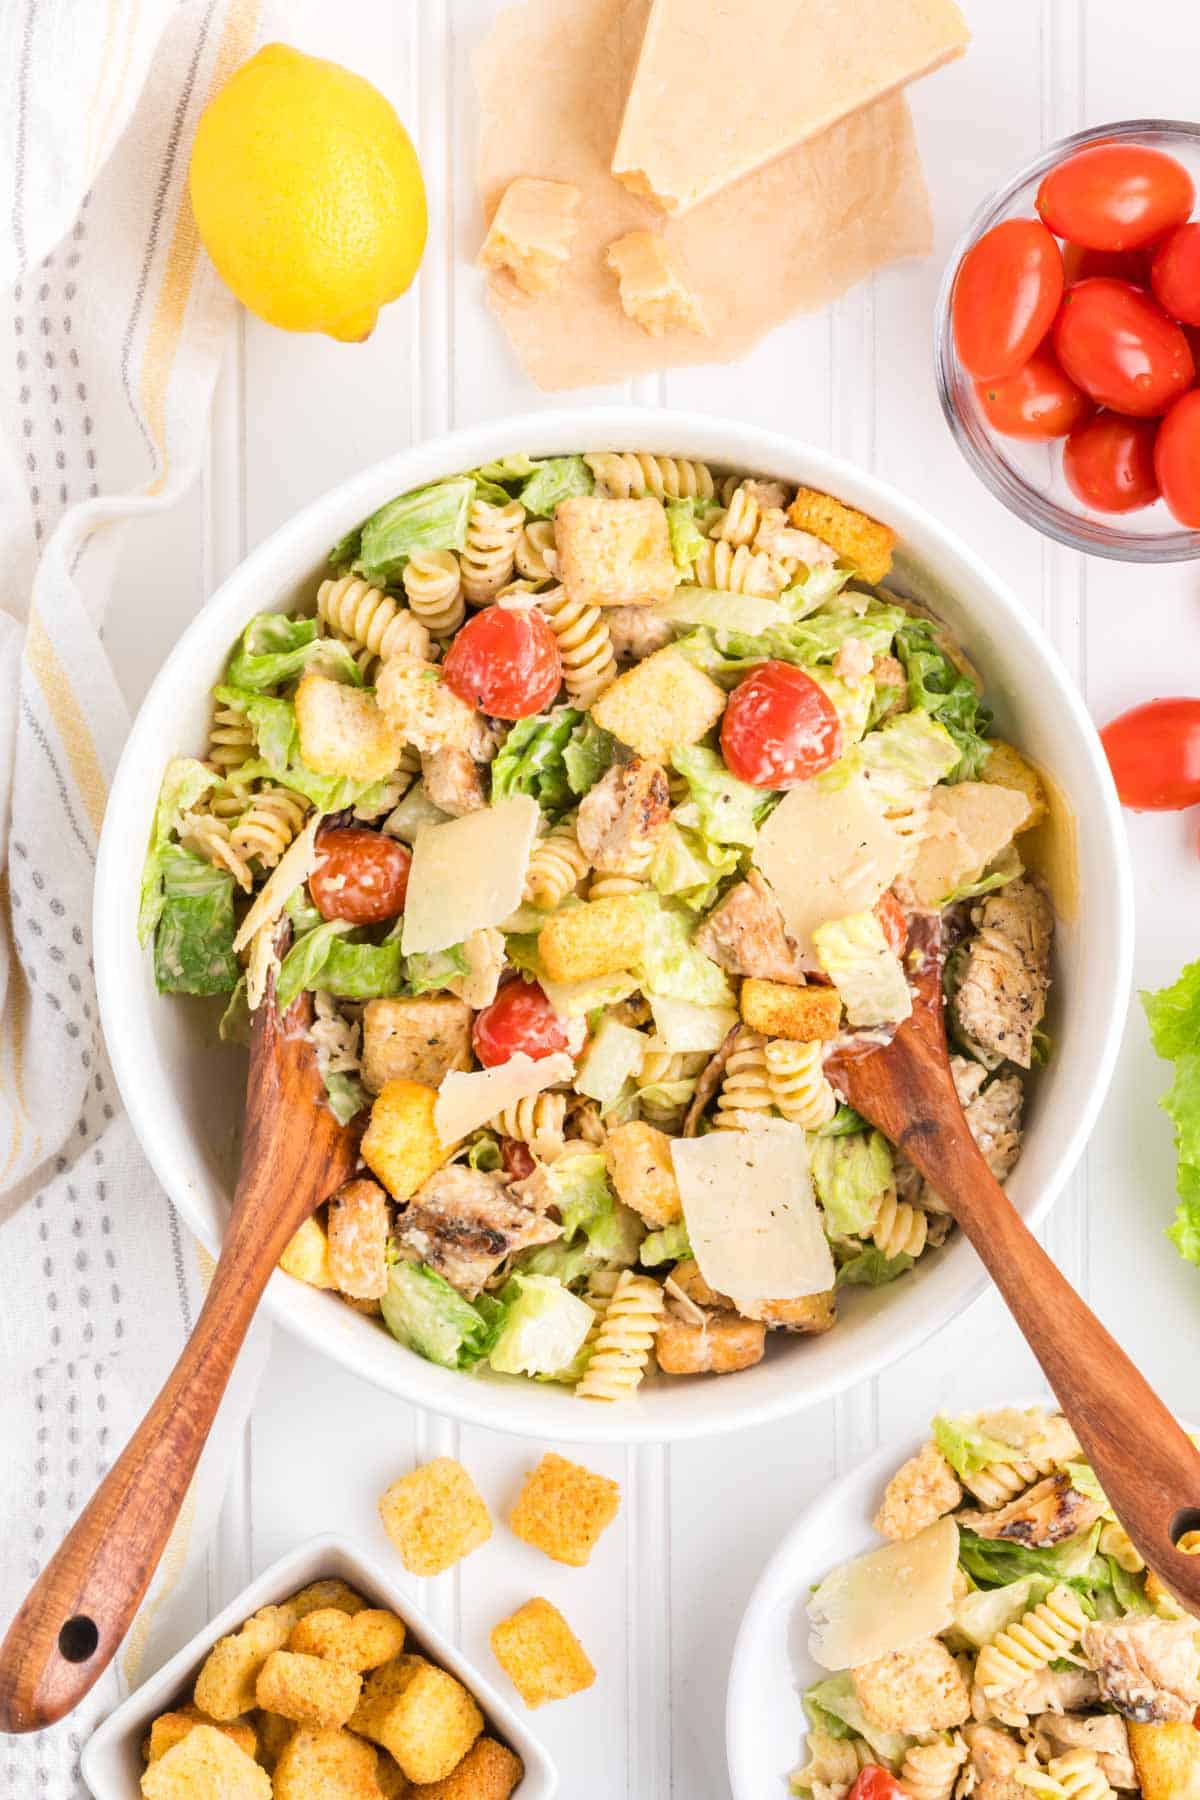 A chicken caesar pasta salad in a white bowl being served with wooden spoons.